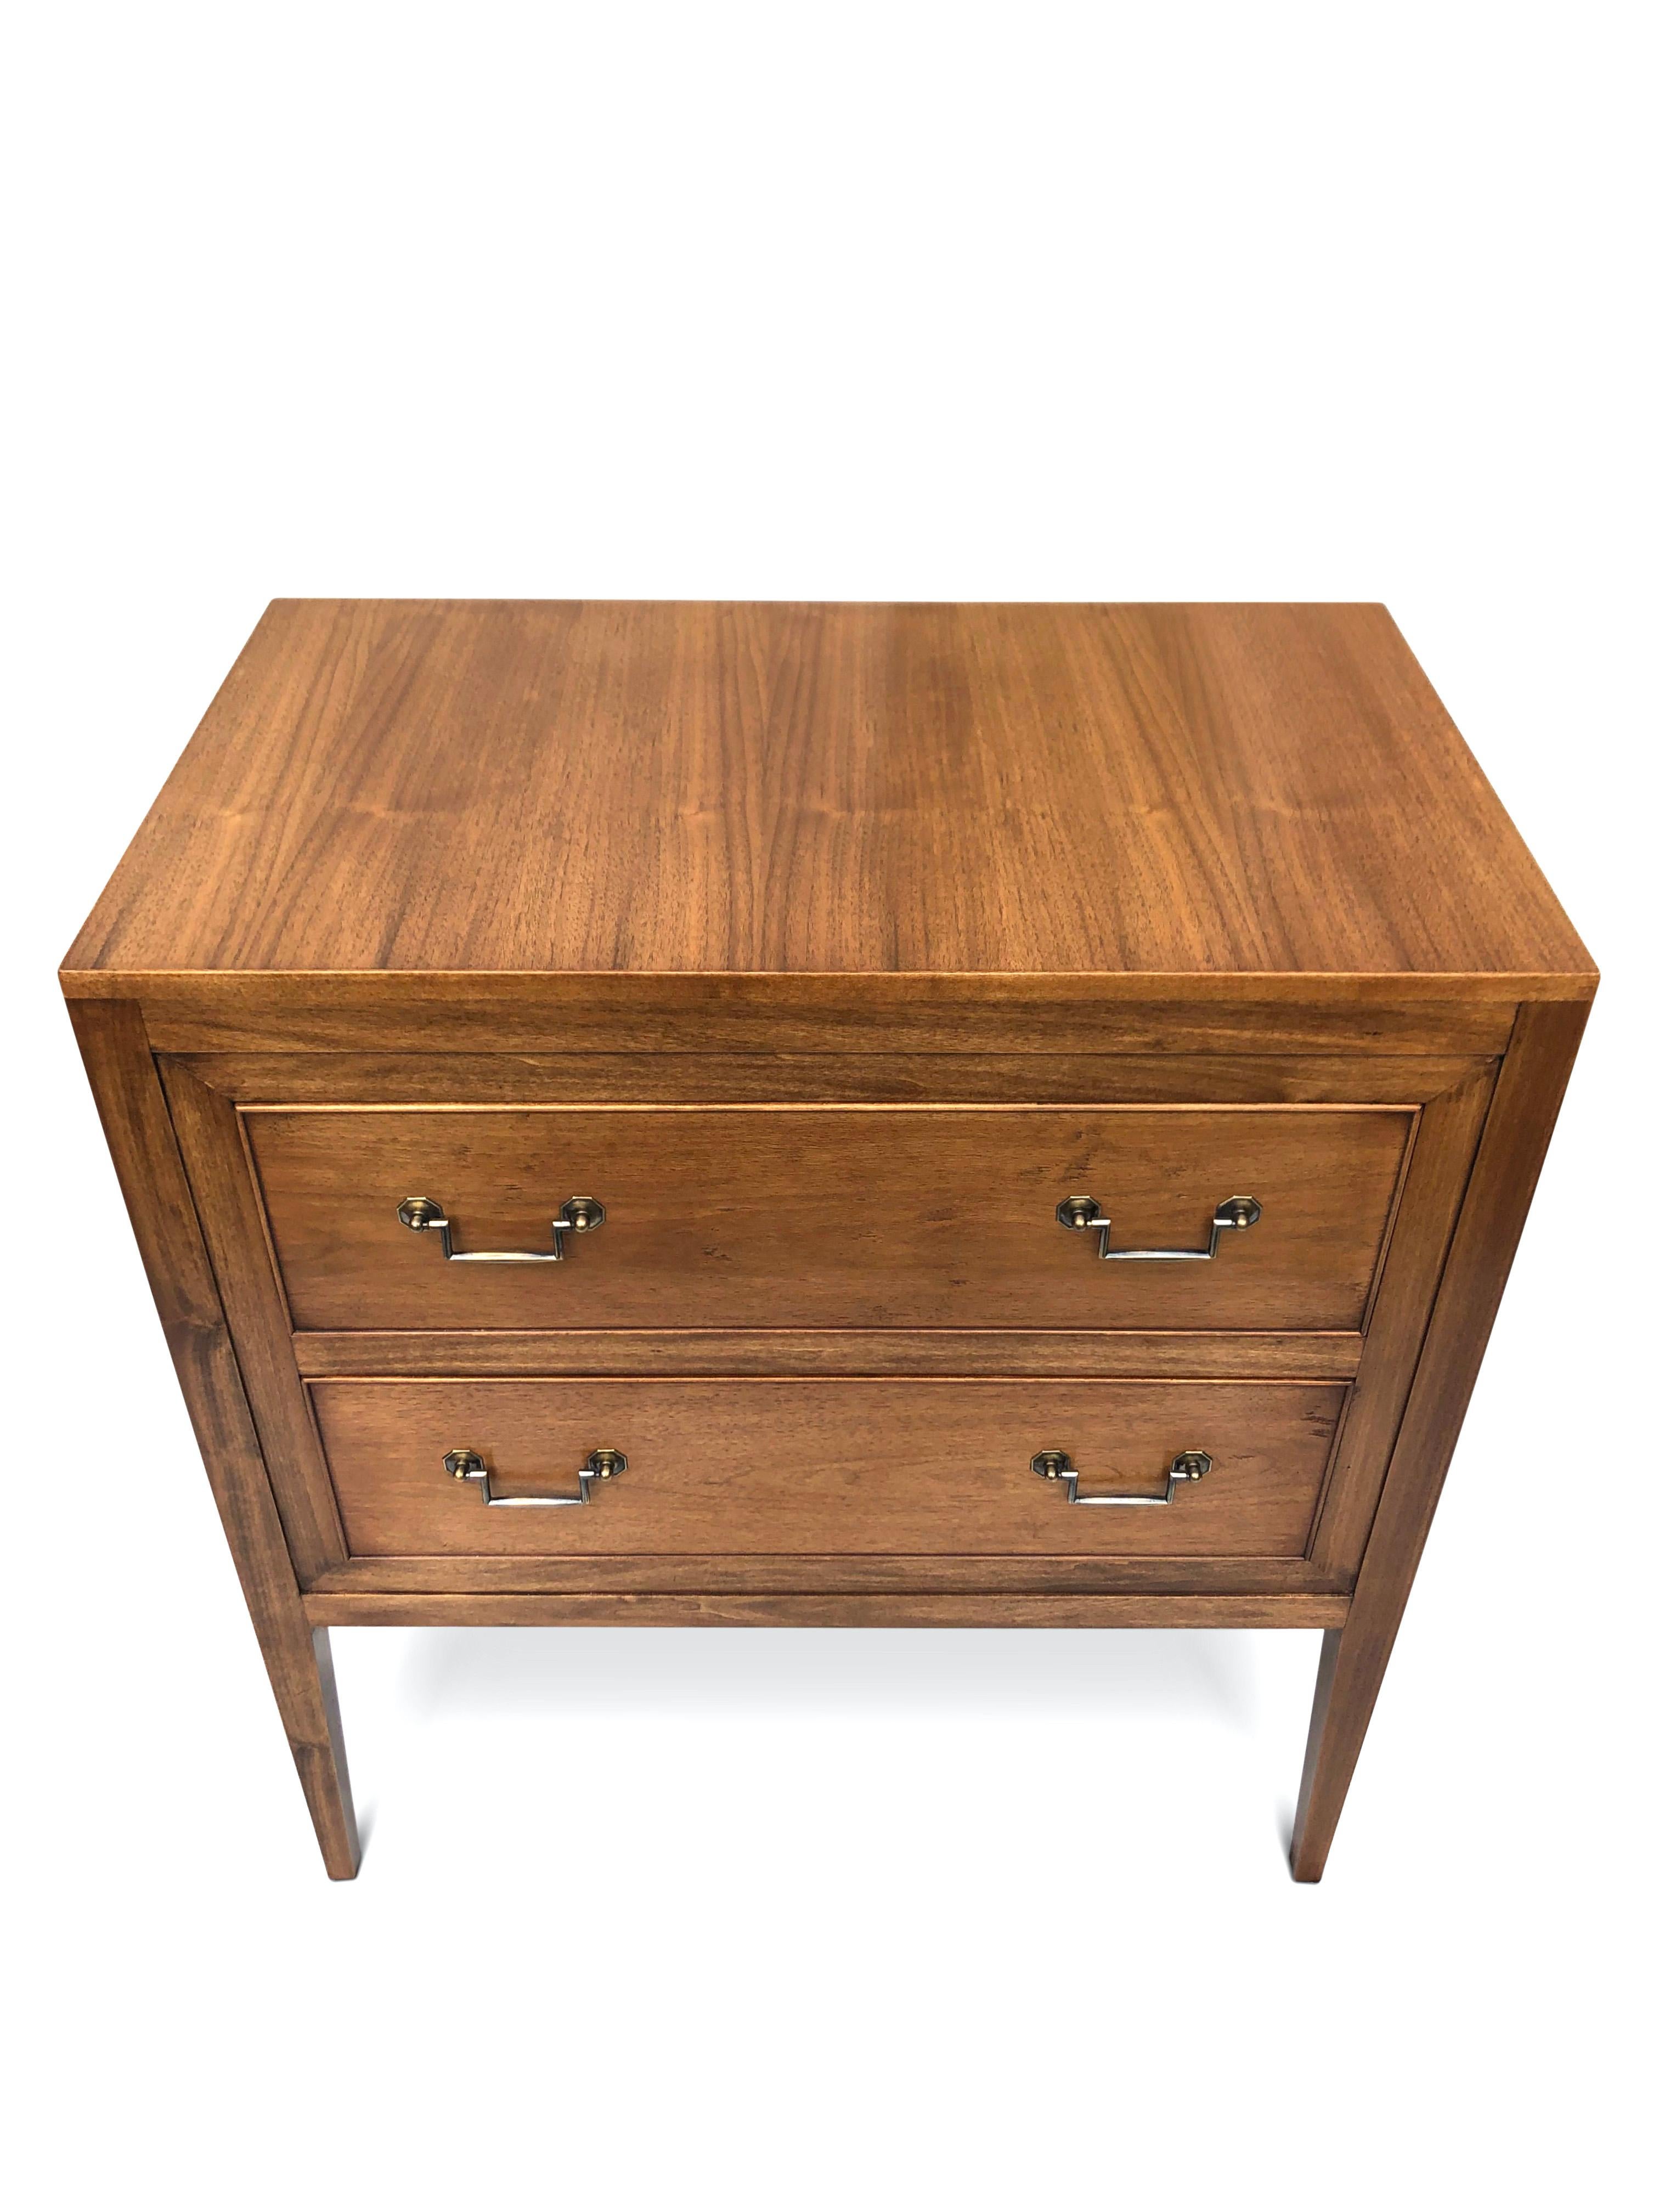 British Walnut Chests of Drawers, Pair bespoke by Garners For Sale